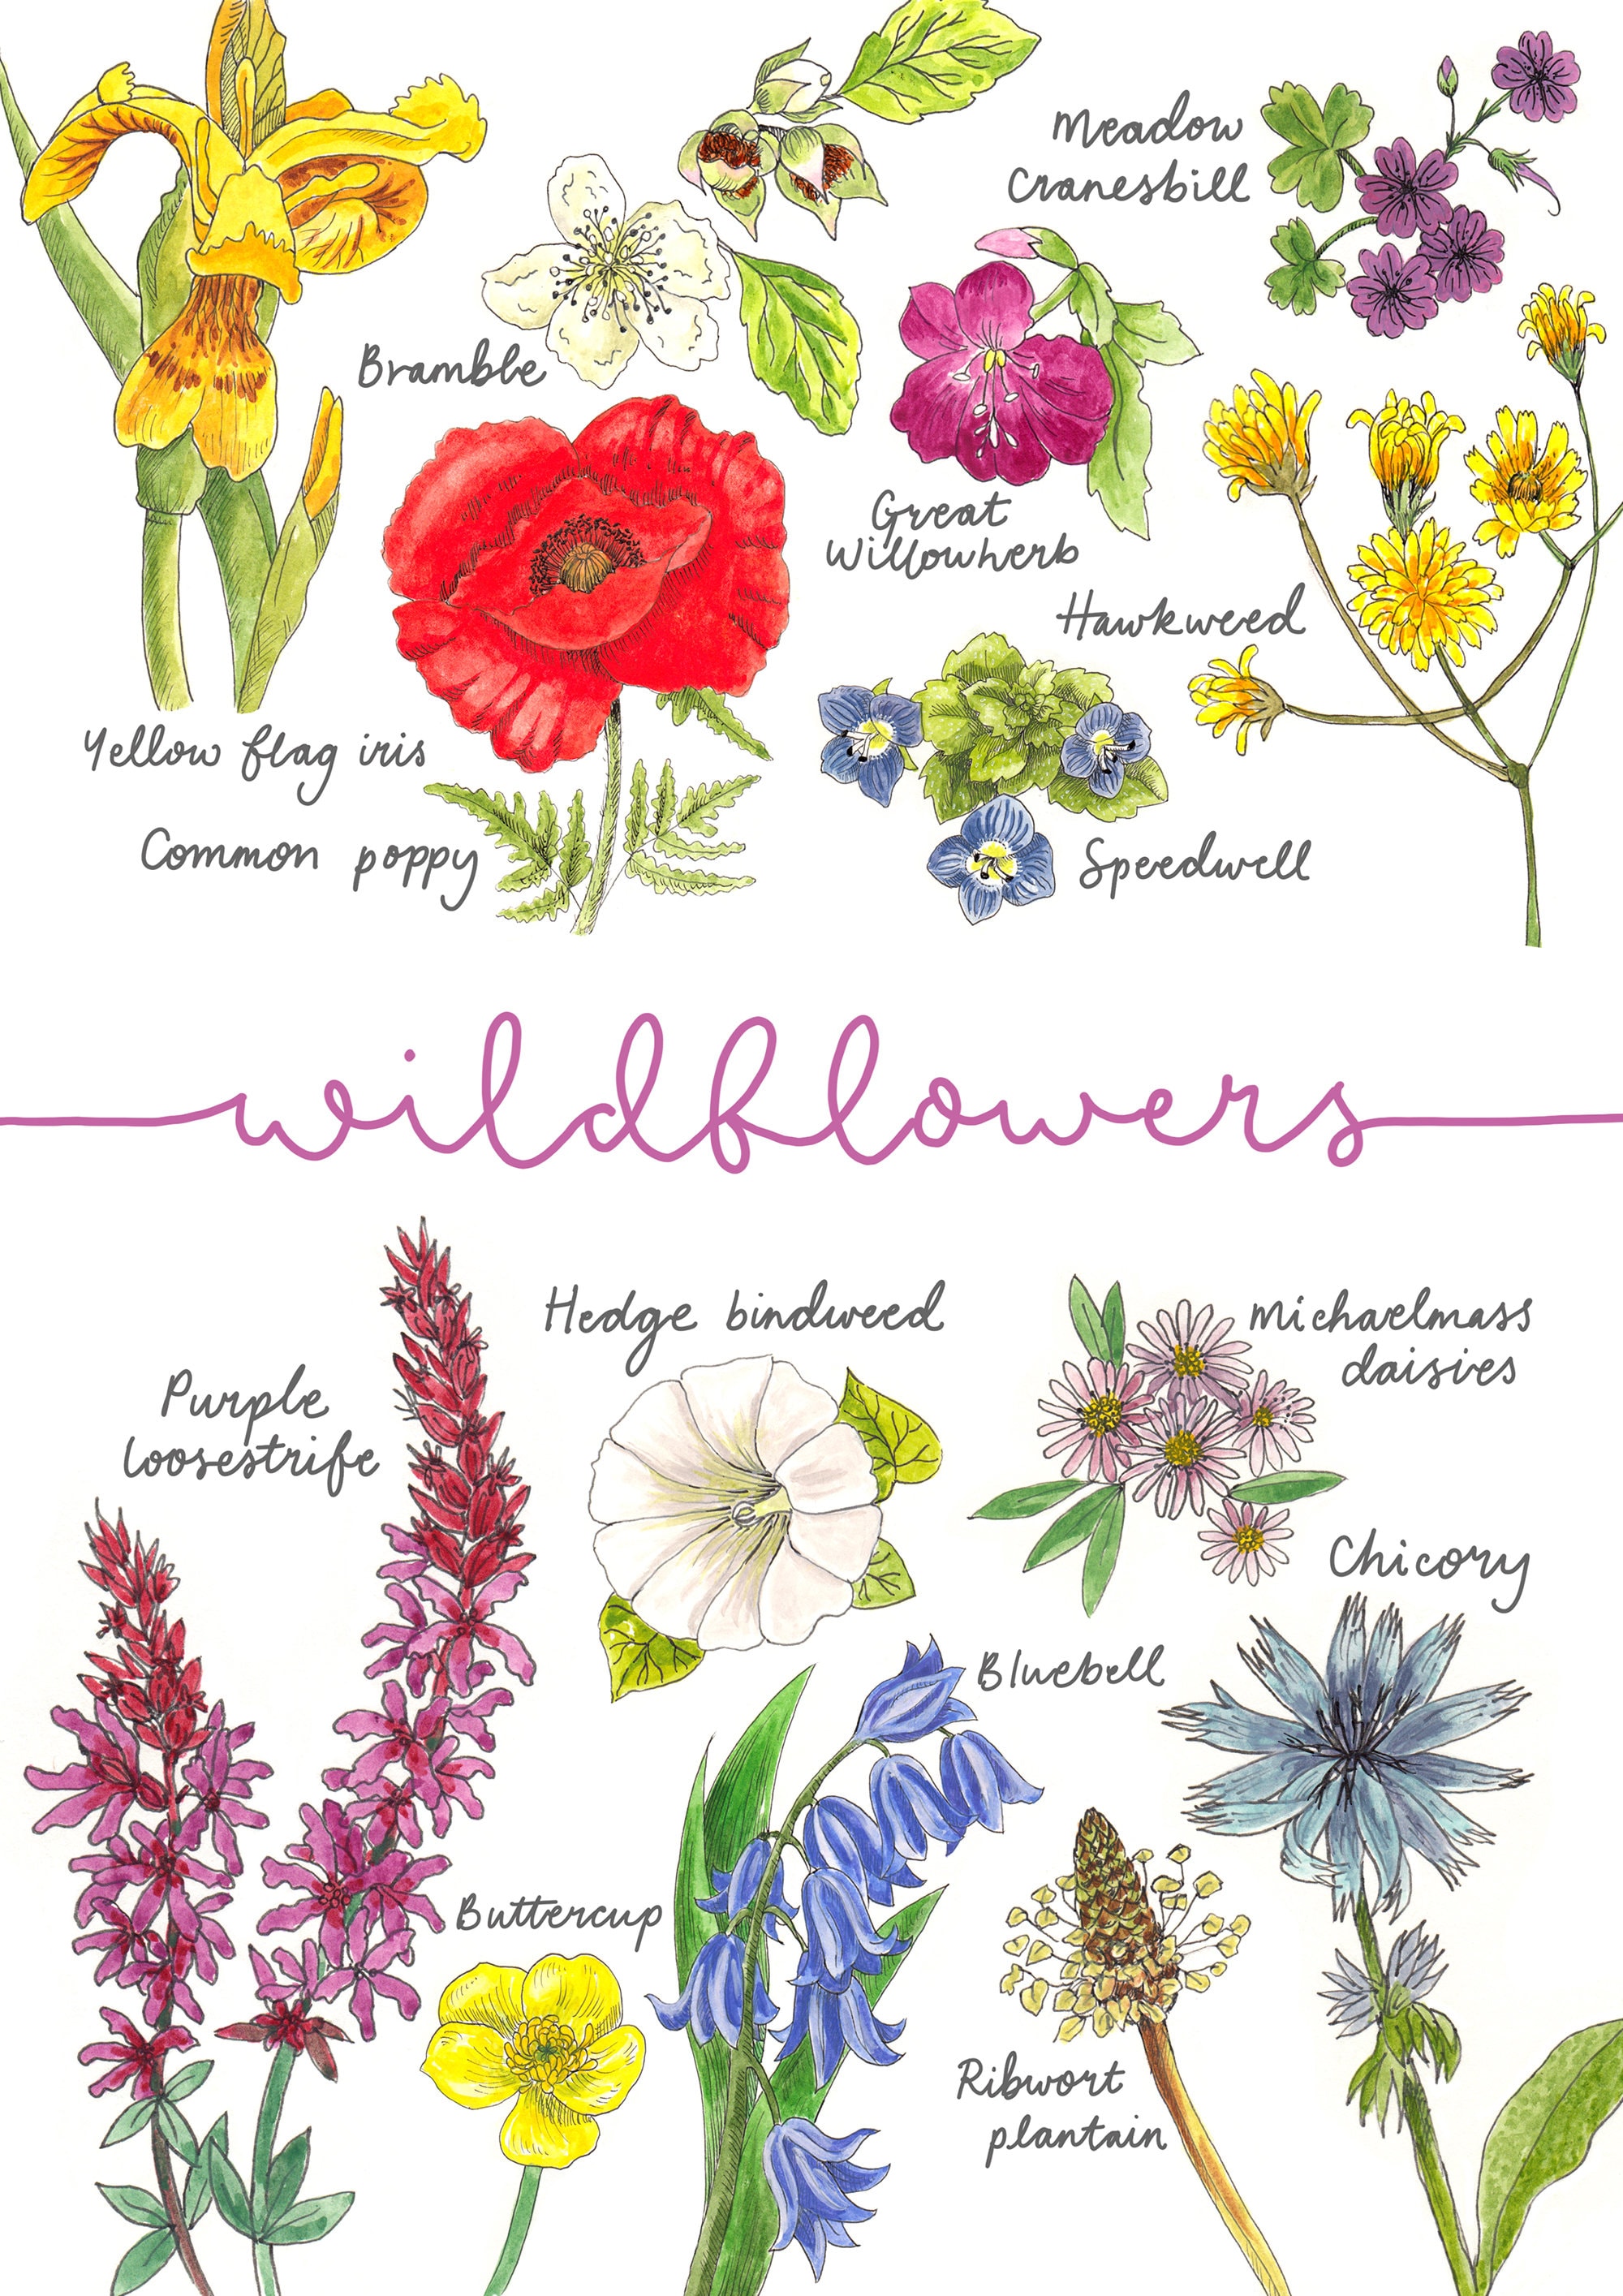 Wildflowers A4 print for framing | Etsy